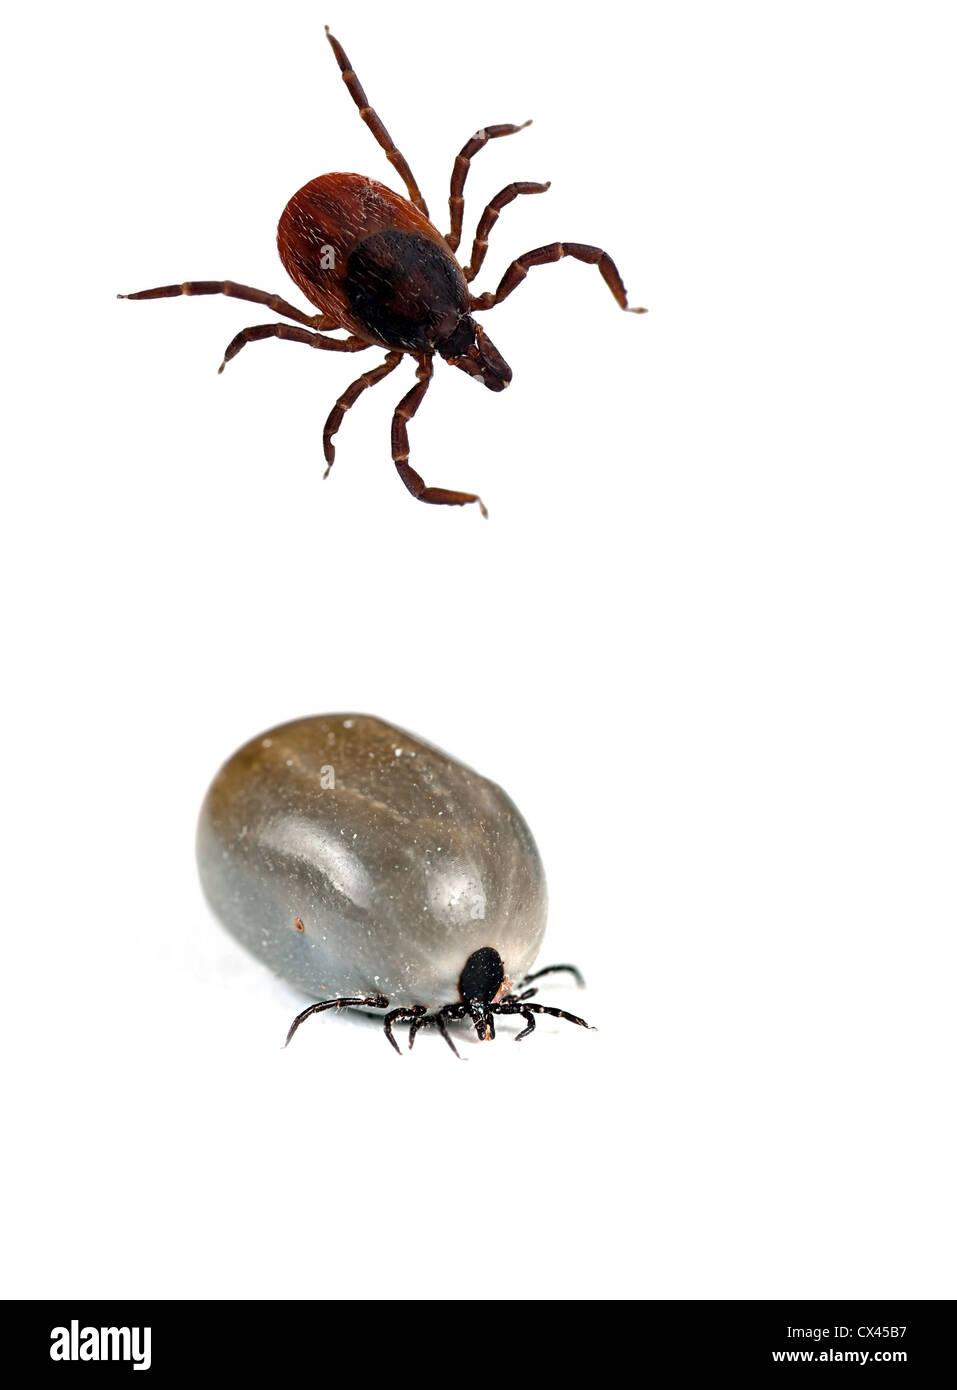 Ixodes scapularis - Blacklegged deer tick, also common on cats and dogs Stock Photo